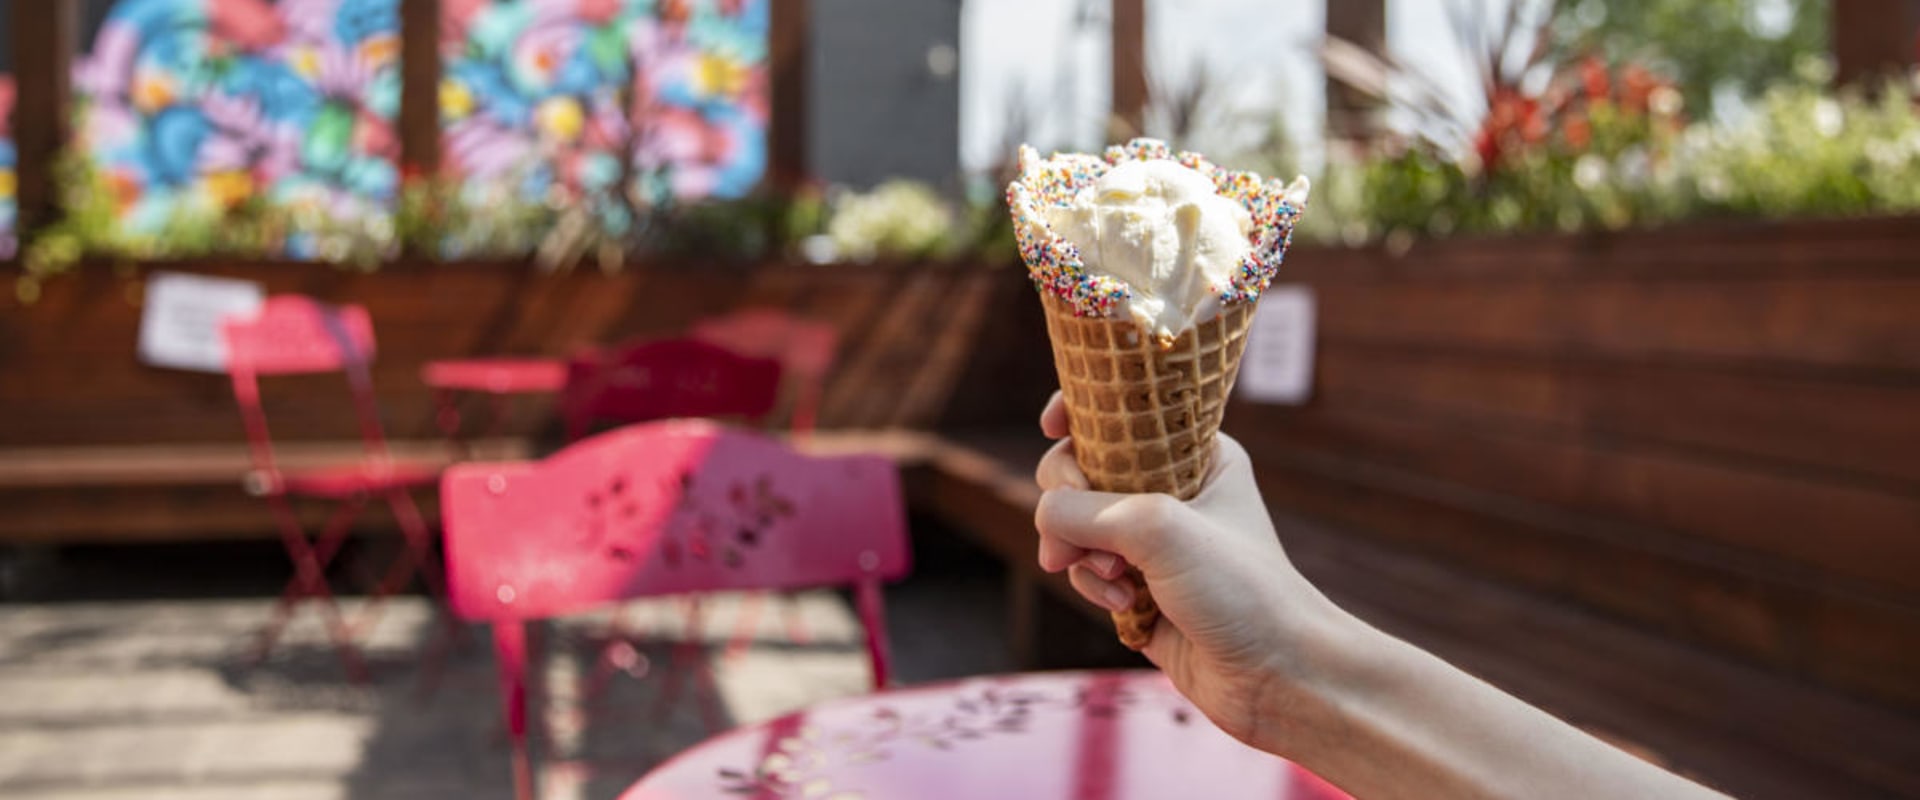 Best Places to Get Ice Cream in Eau Claire